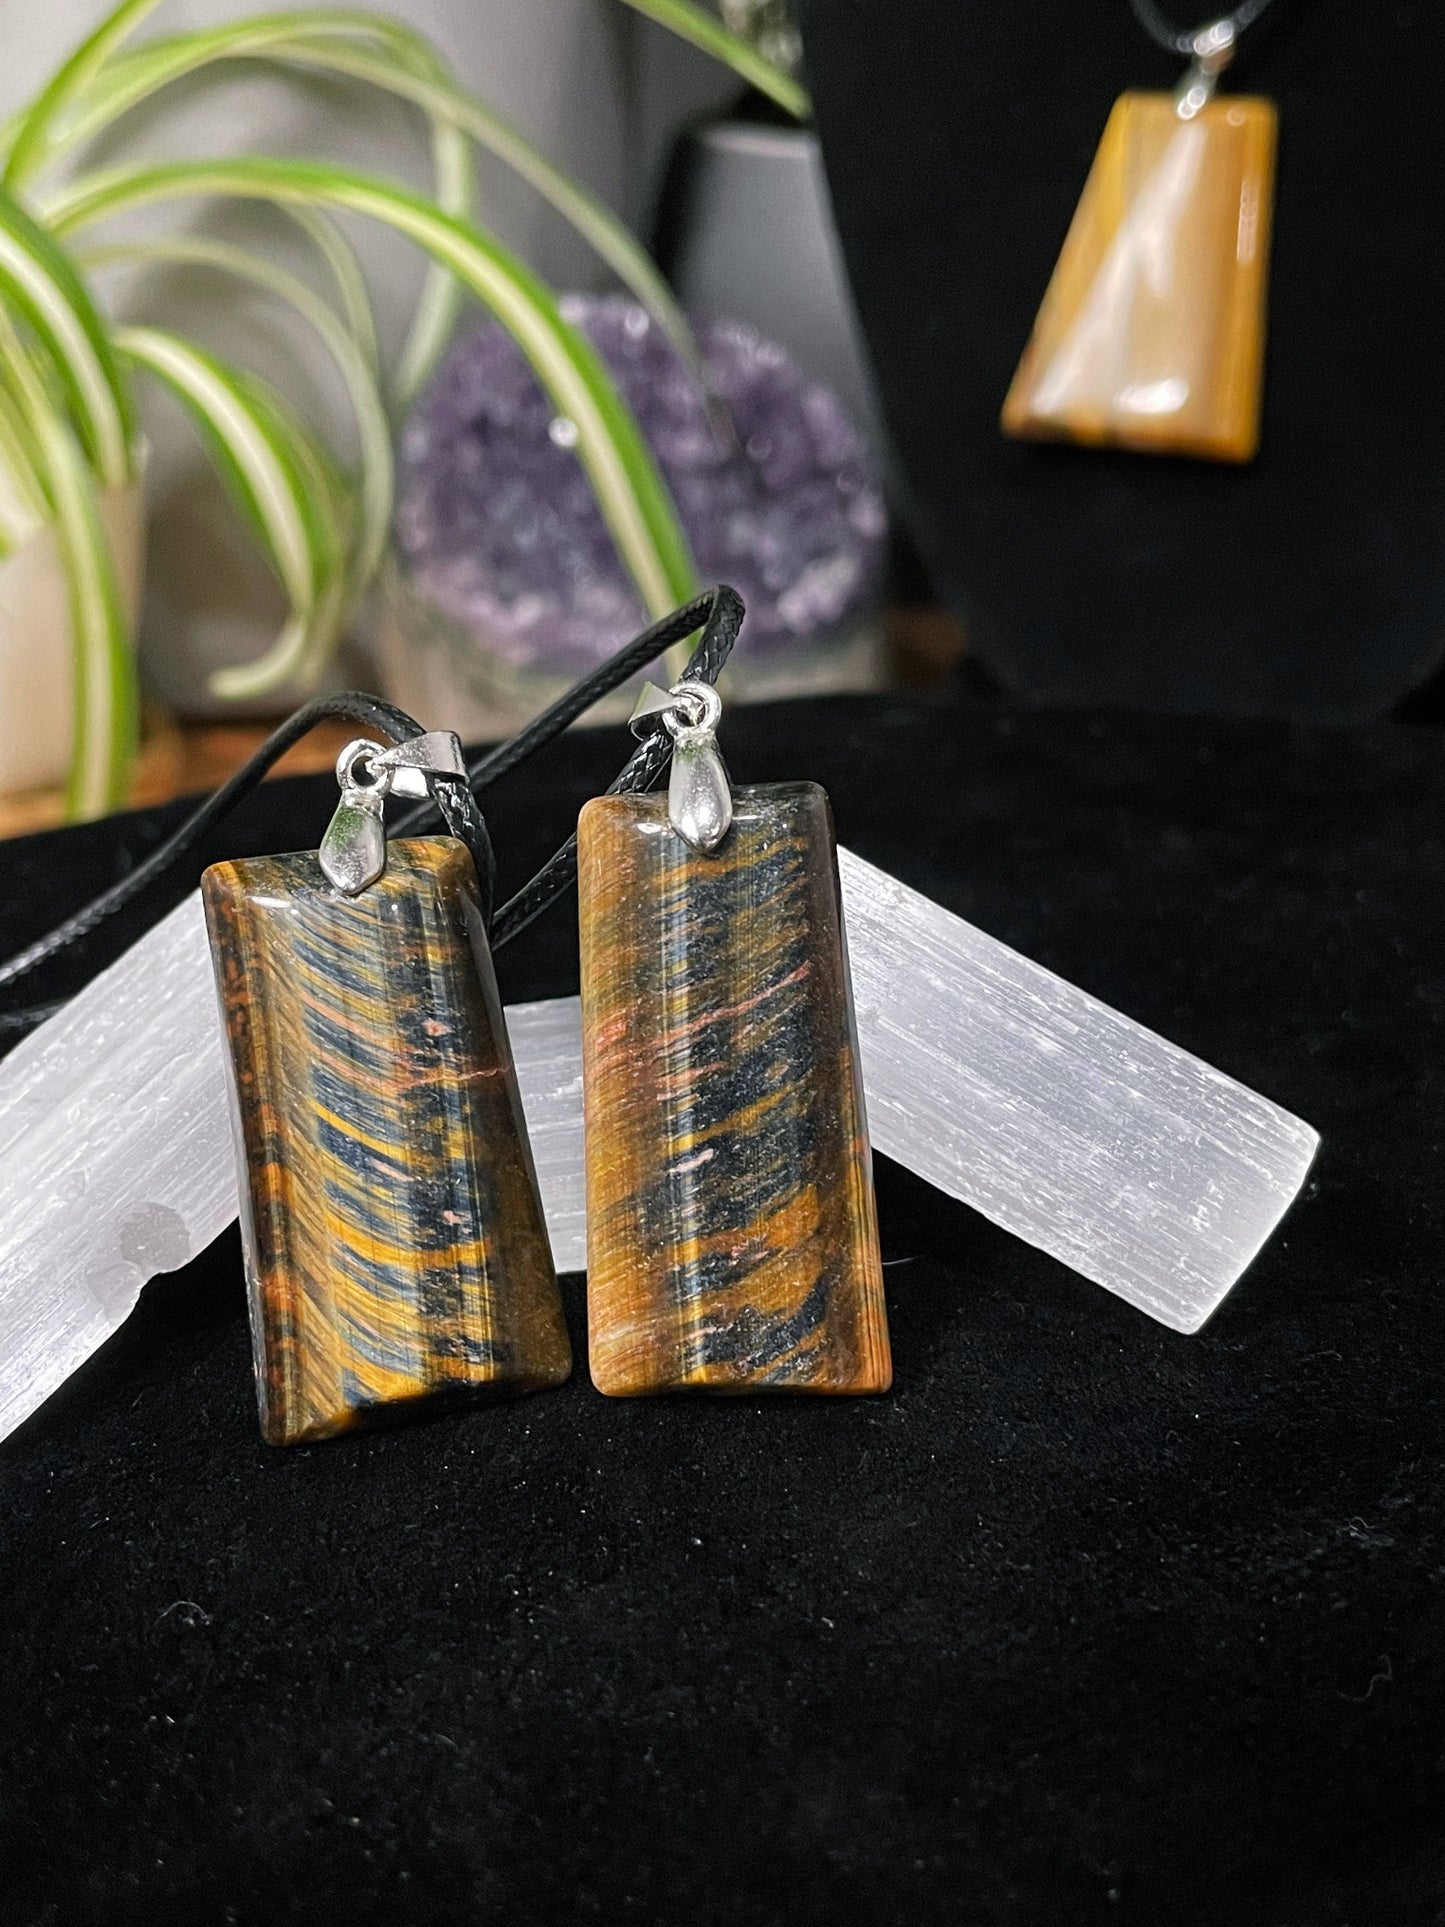 An image of a matching pair of yellow and blue tiger's eye rectangular shaped pendants on necklaces. They sit atop some selenite chunks and a black velvet surface.